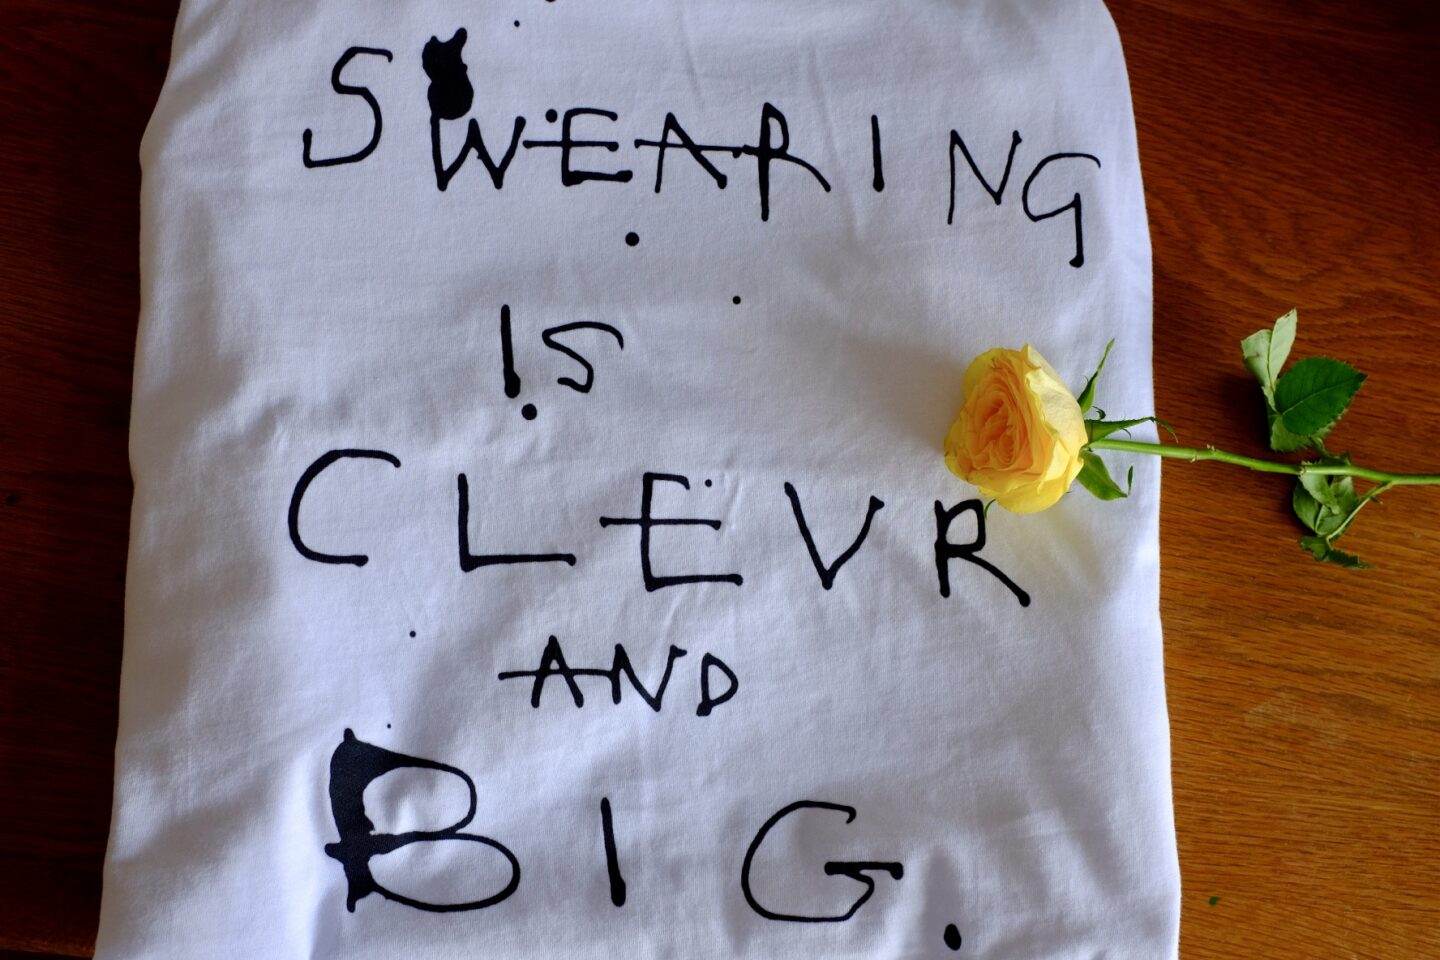 Swearing is clever and big tee from idiot